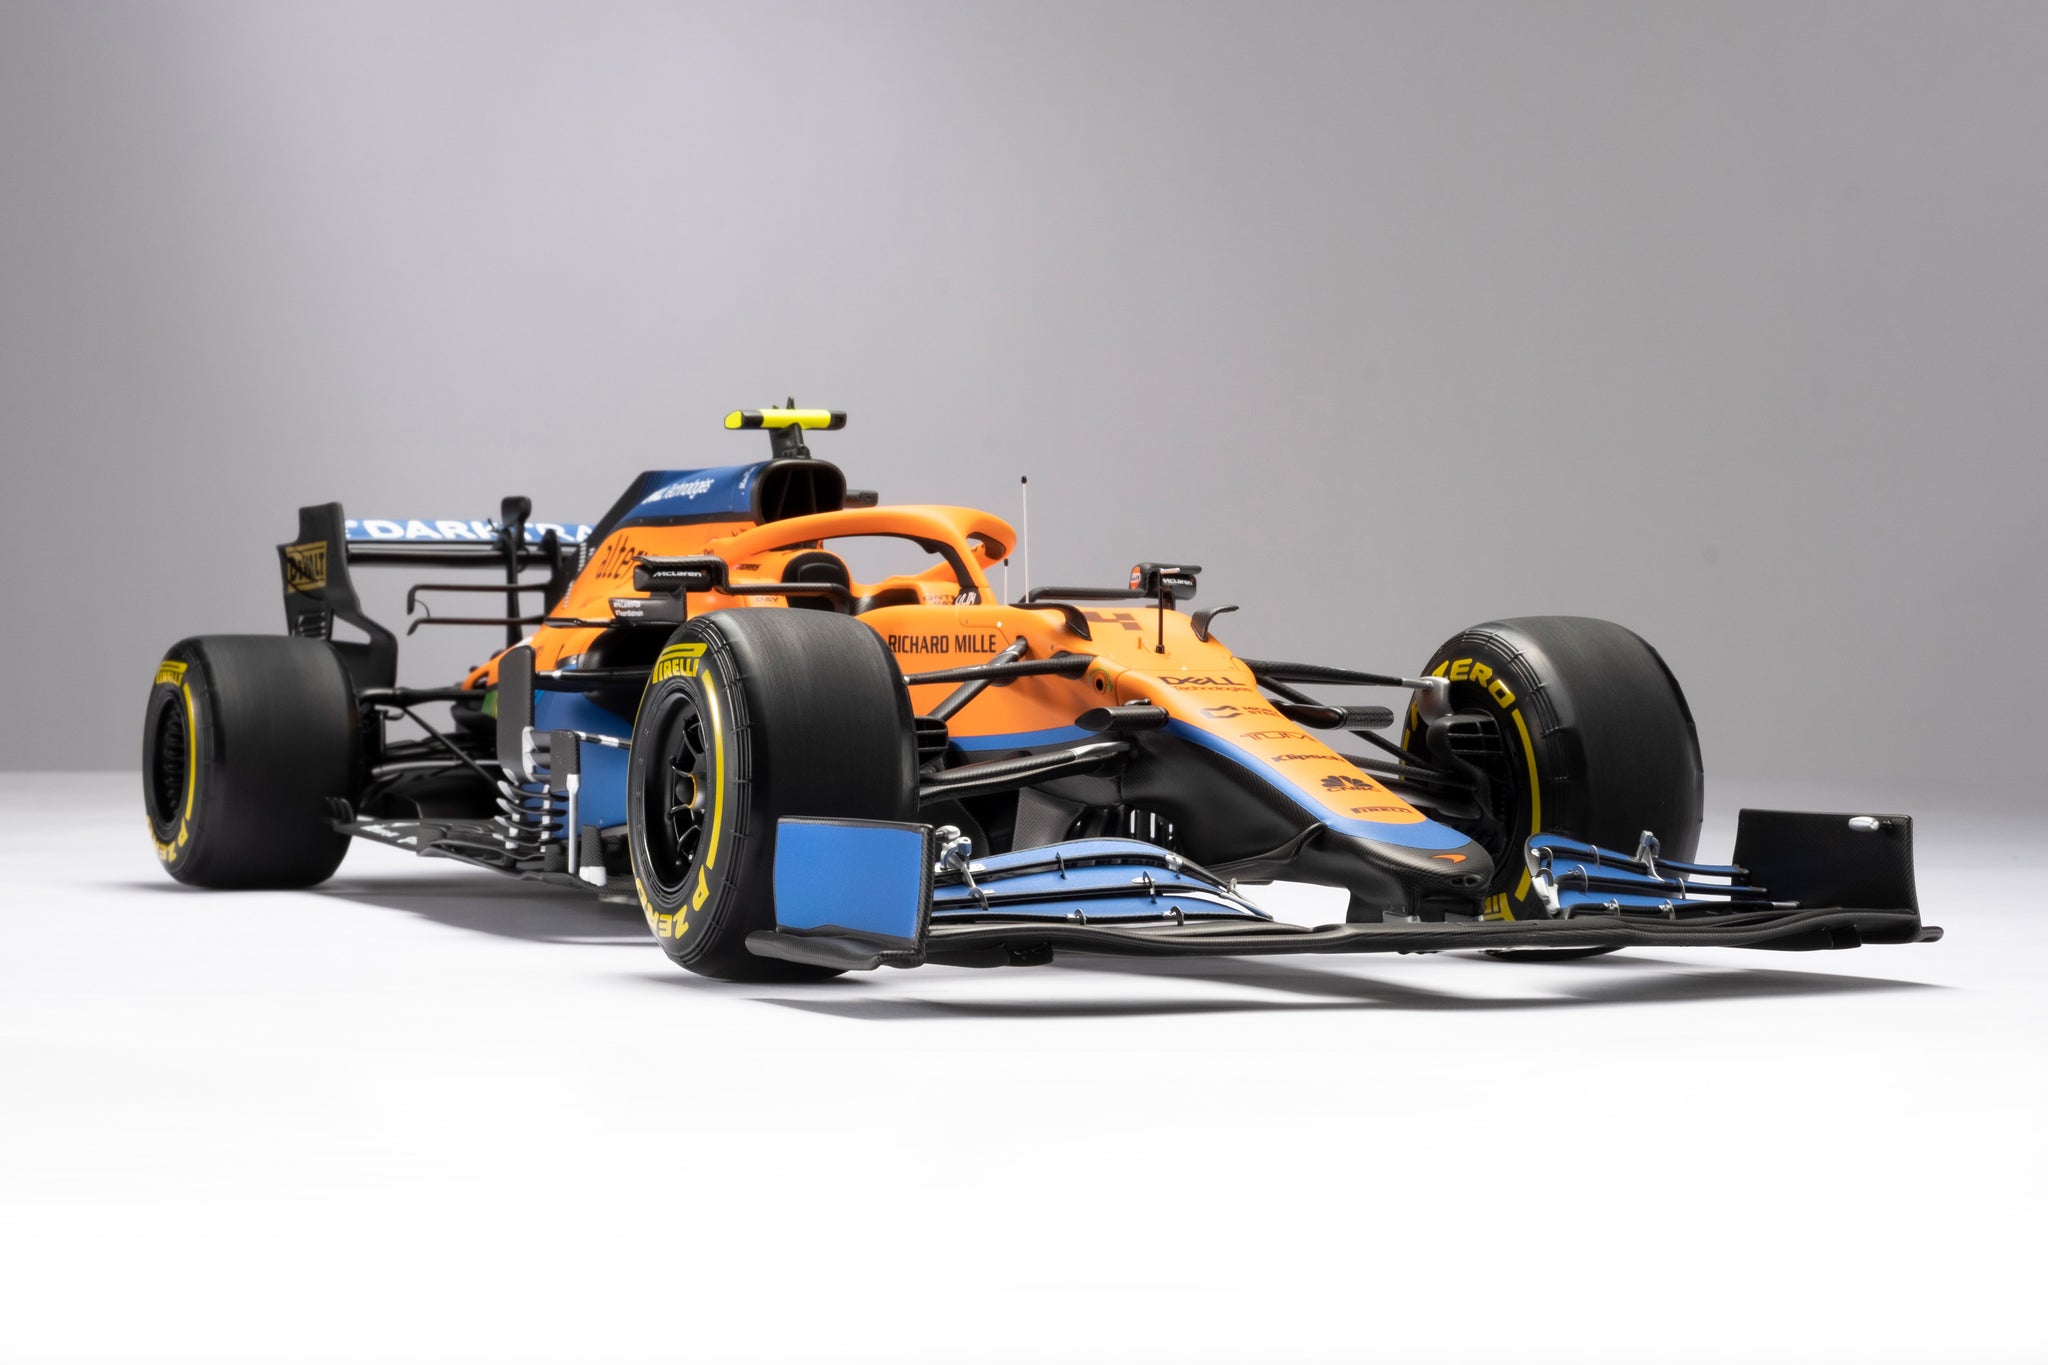 McLaren MCL35M at 1:8 scale